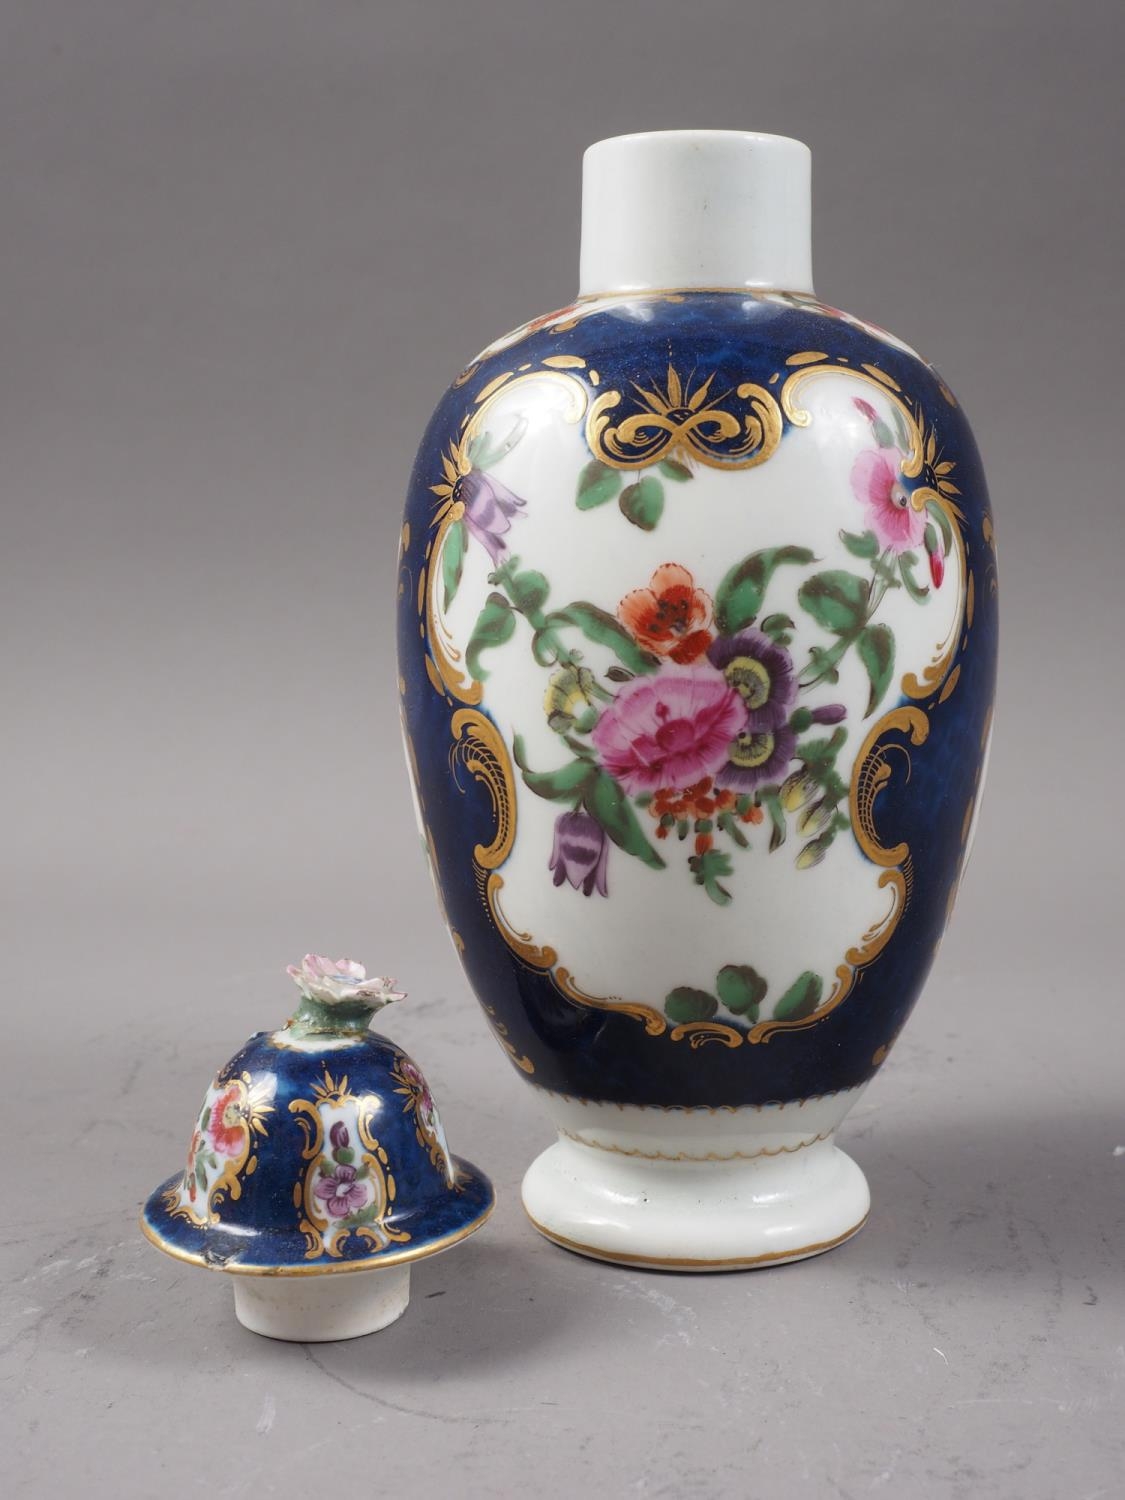 An 18th century Worcester oviform tea caddy with reserved floral panels on a blue scale ground - Image 2 of 4